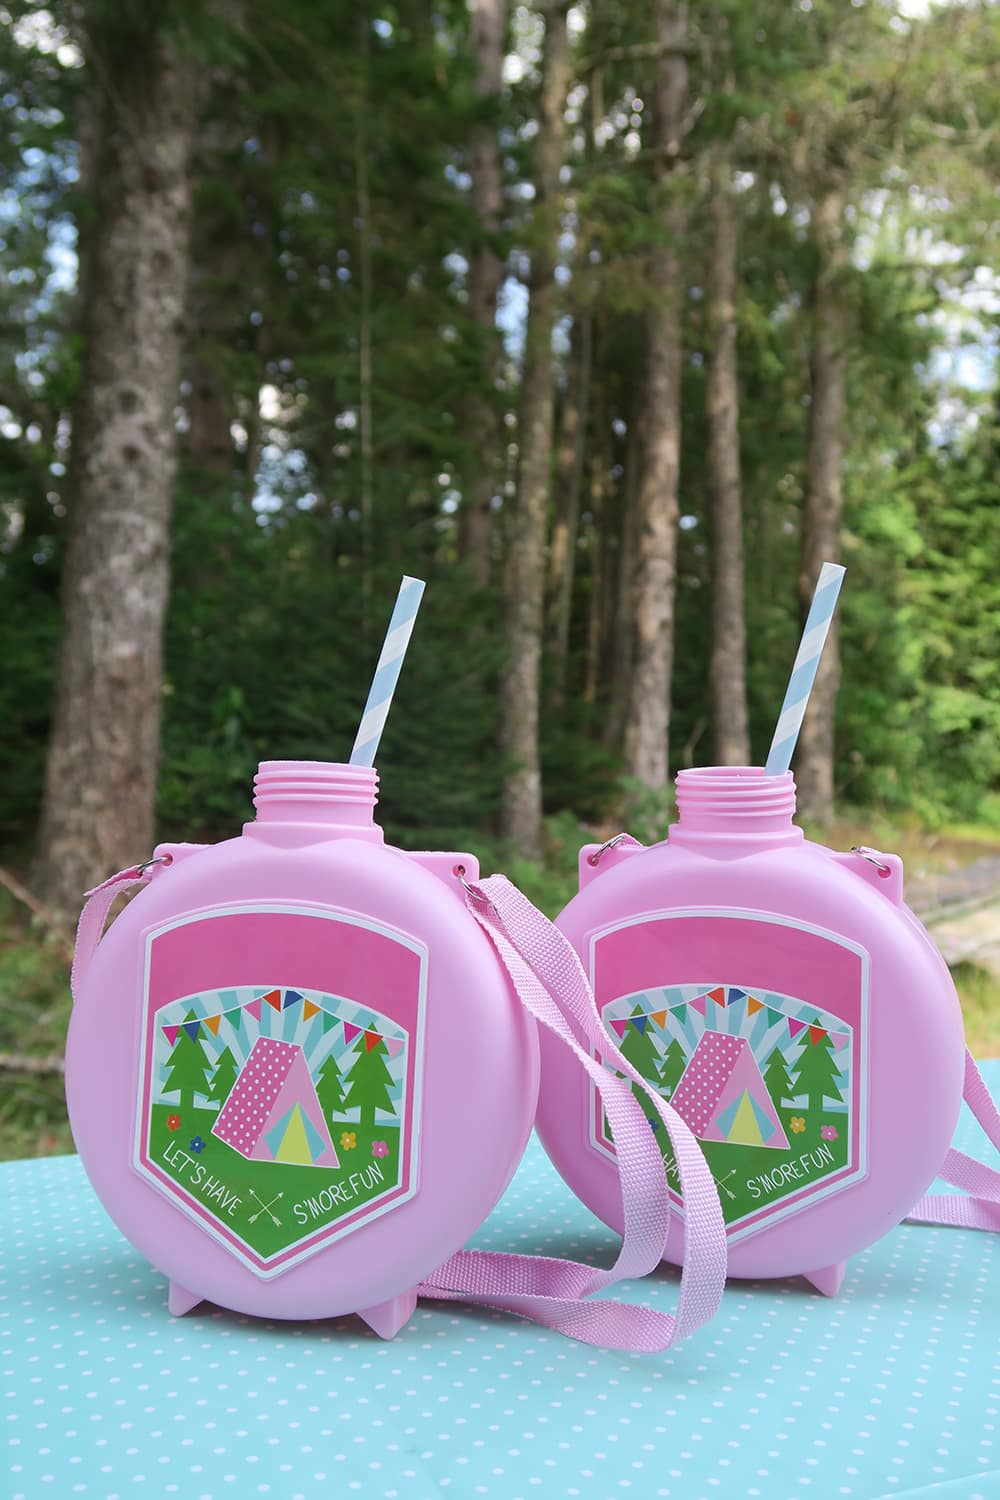 A camping birthday party is perfect for girls, young and old! This is one of the easiest cheap birthday party ideas that's fun for the whole family. 